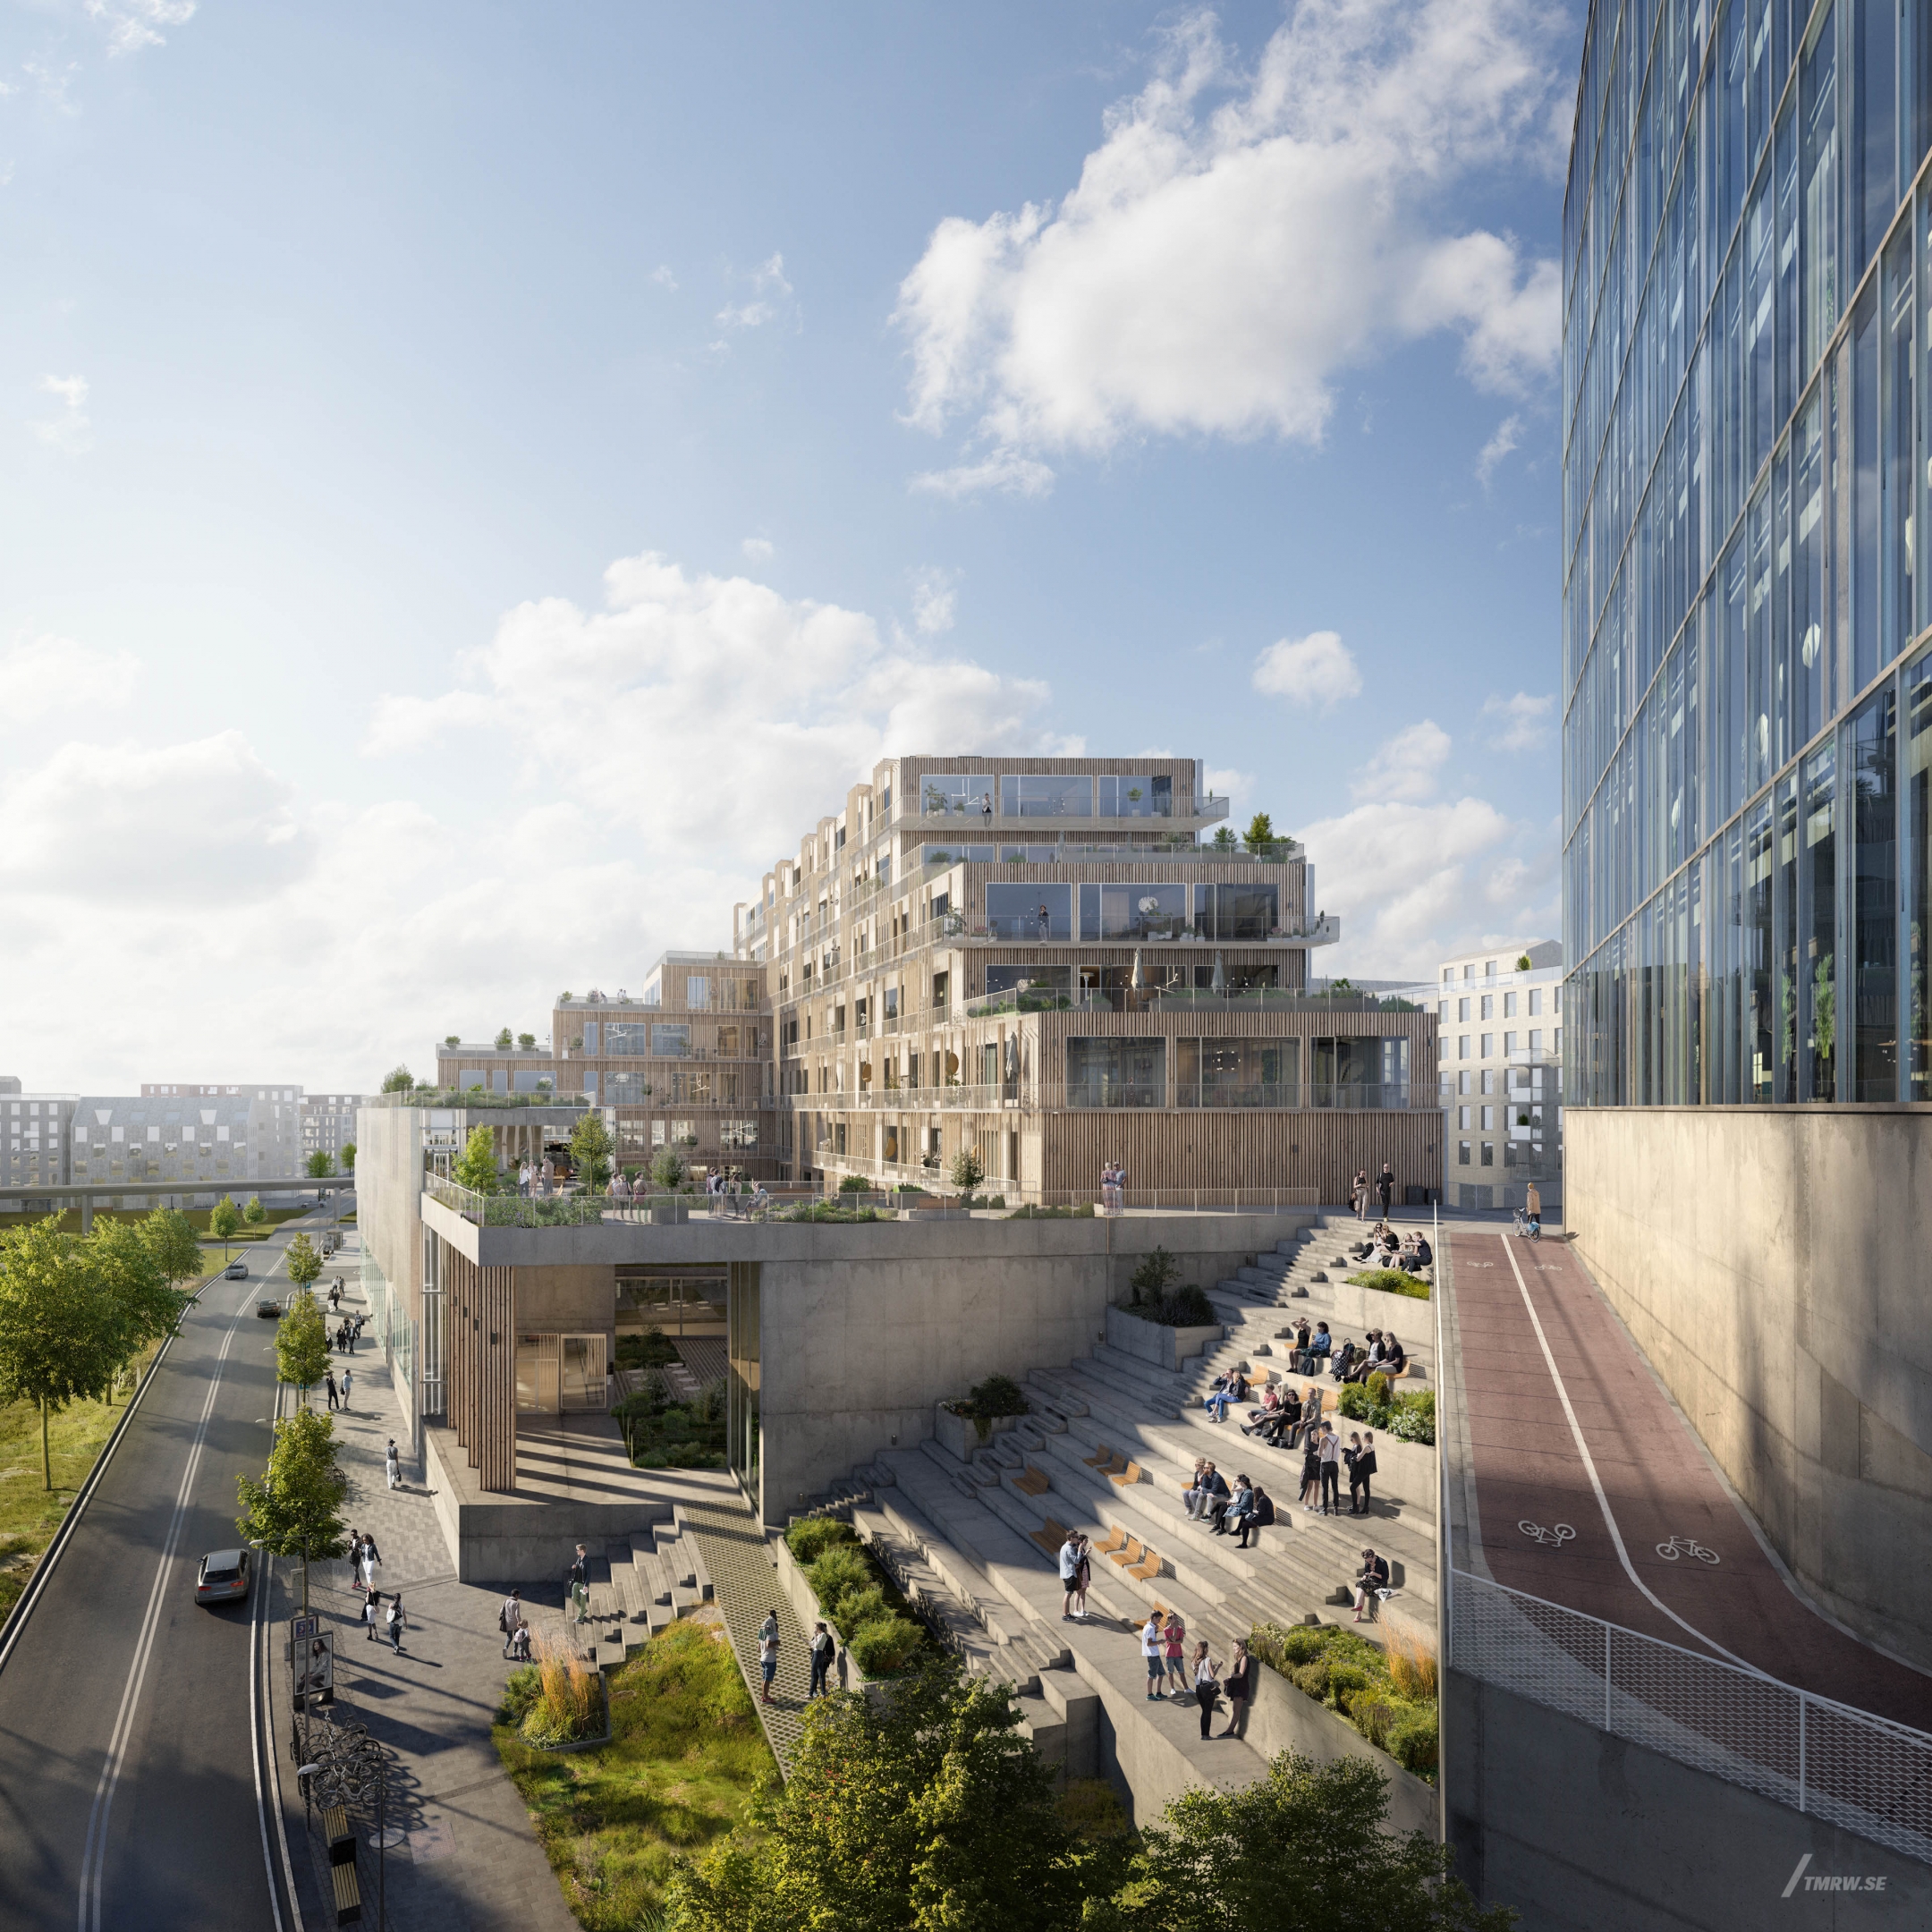 Architectural visualization of Östra Hagastaden for Studio Sthlm, city area with civic, office and residential buildings